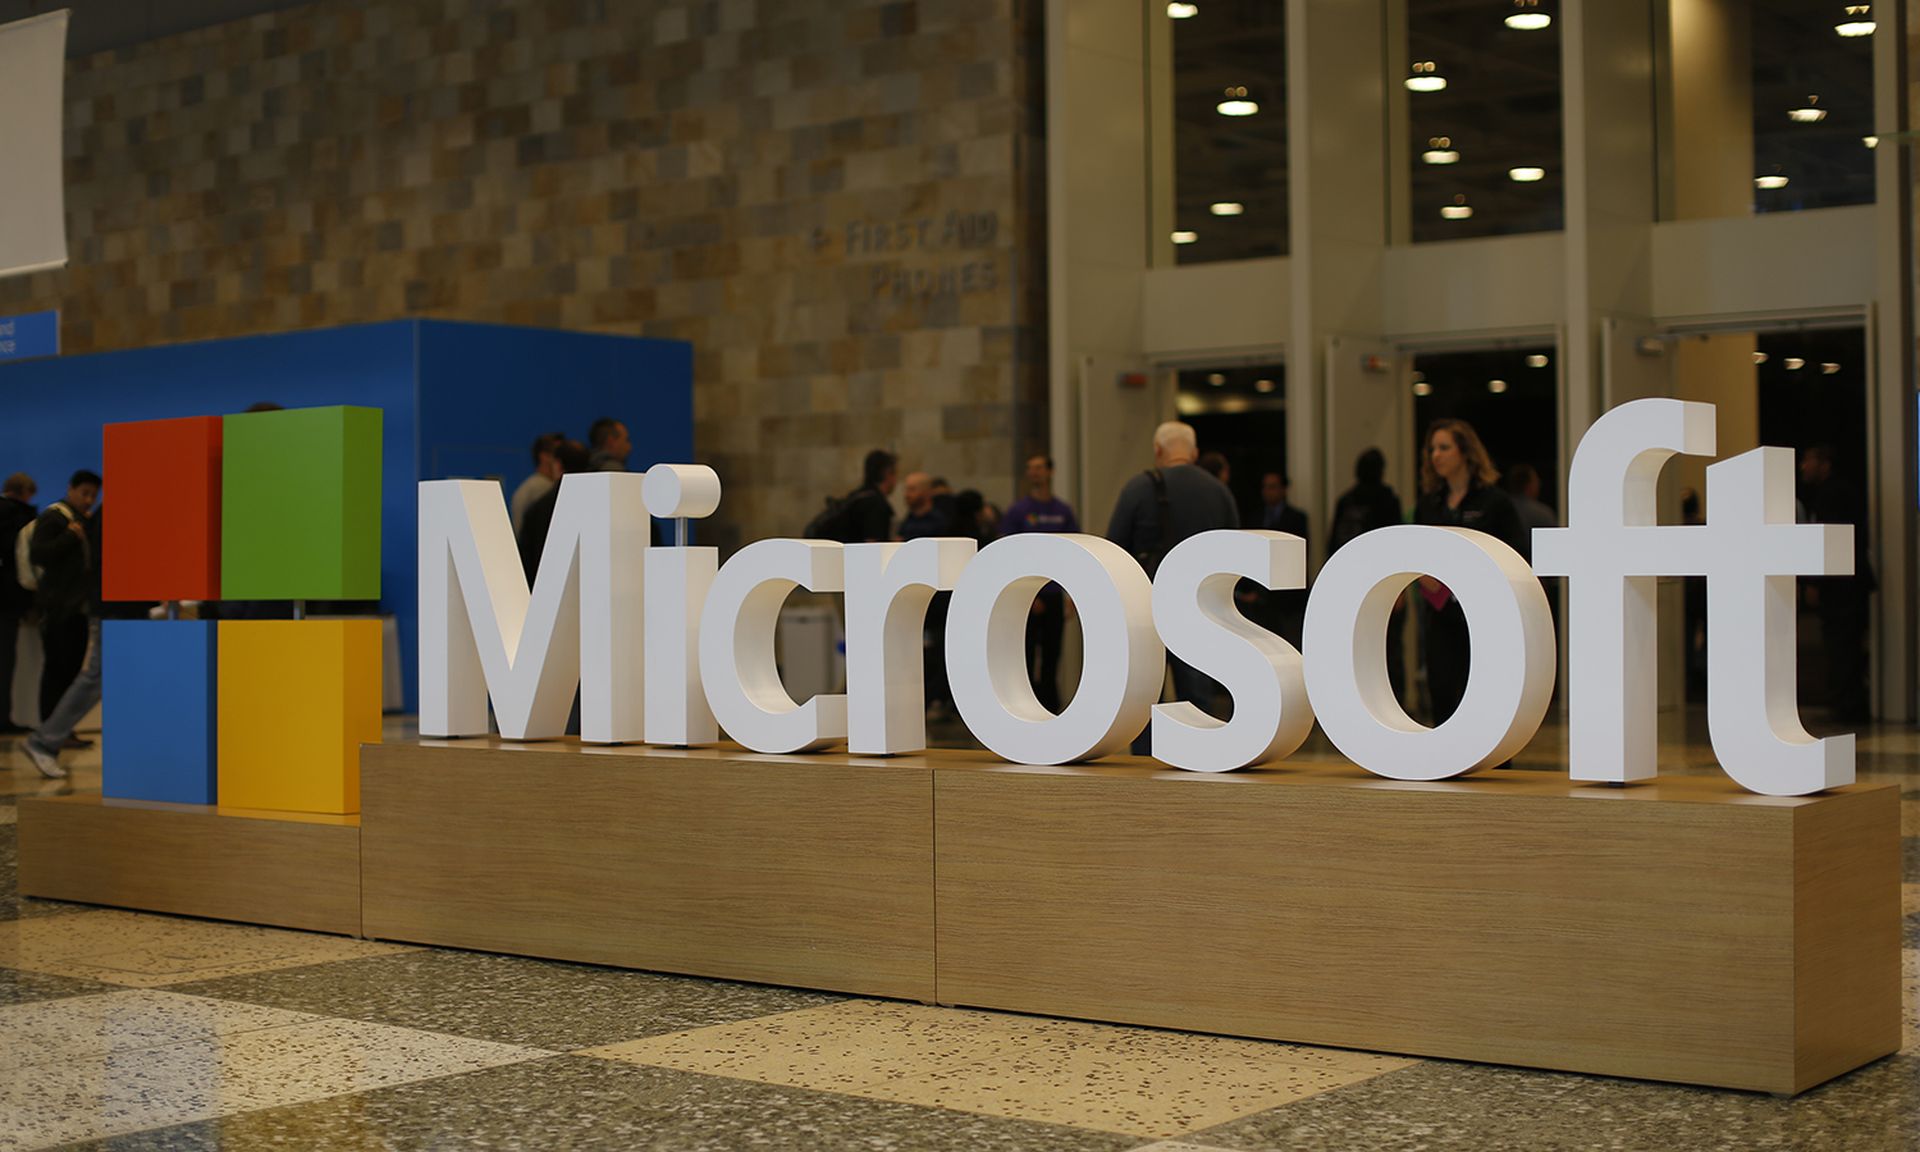 A Microsoft logo is seen at Moscone Center in San Francisco. (Photo by Stephen Lam/Getty Images)